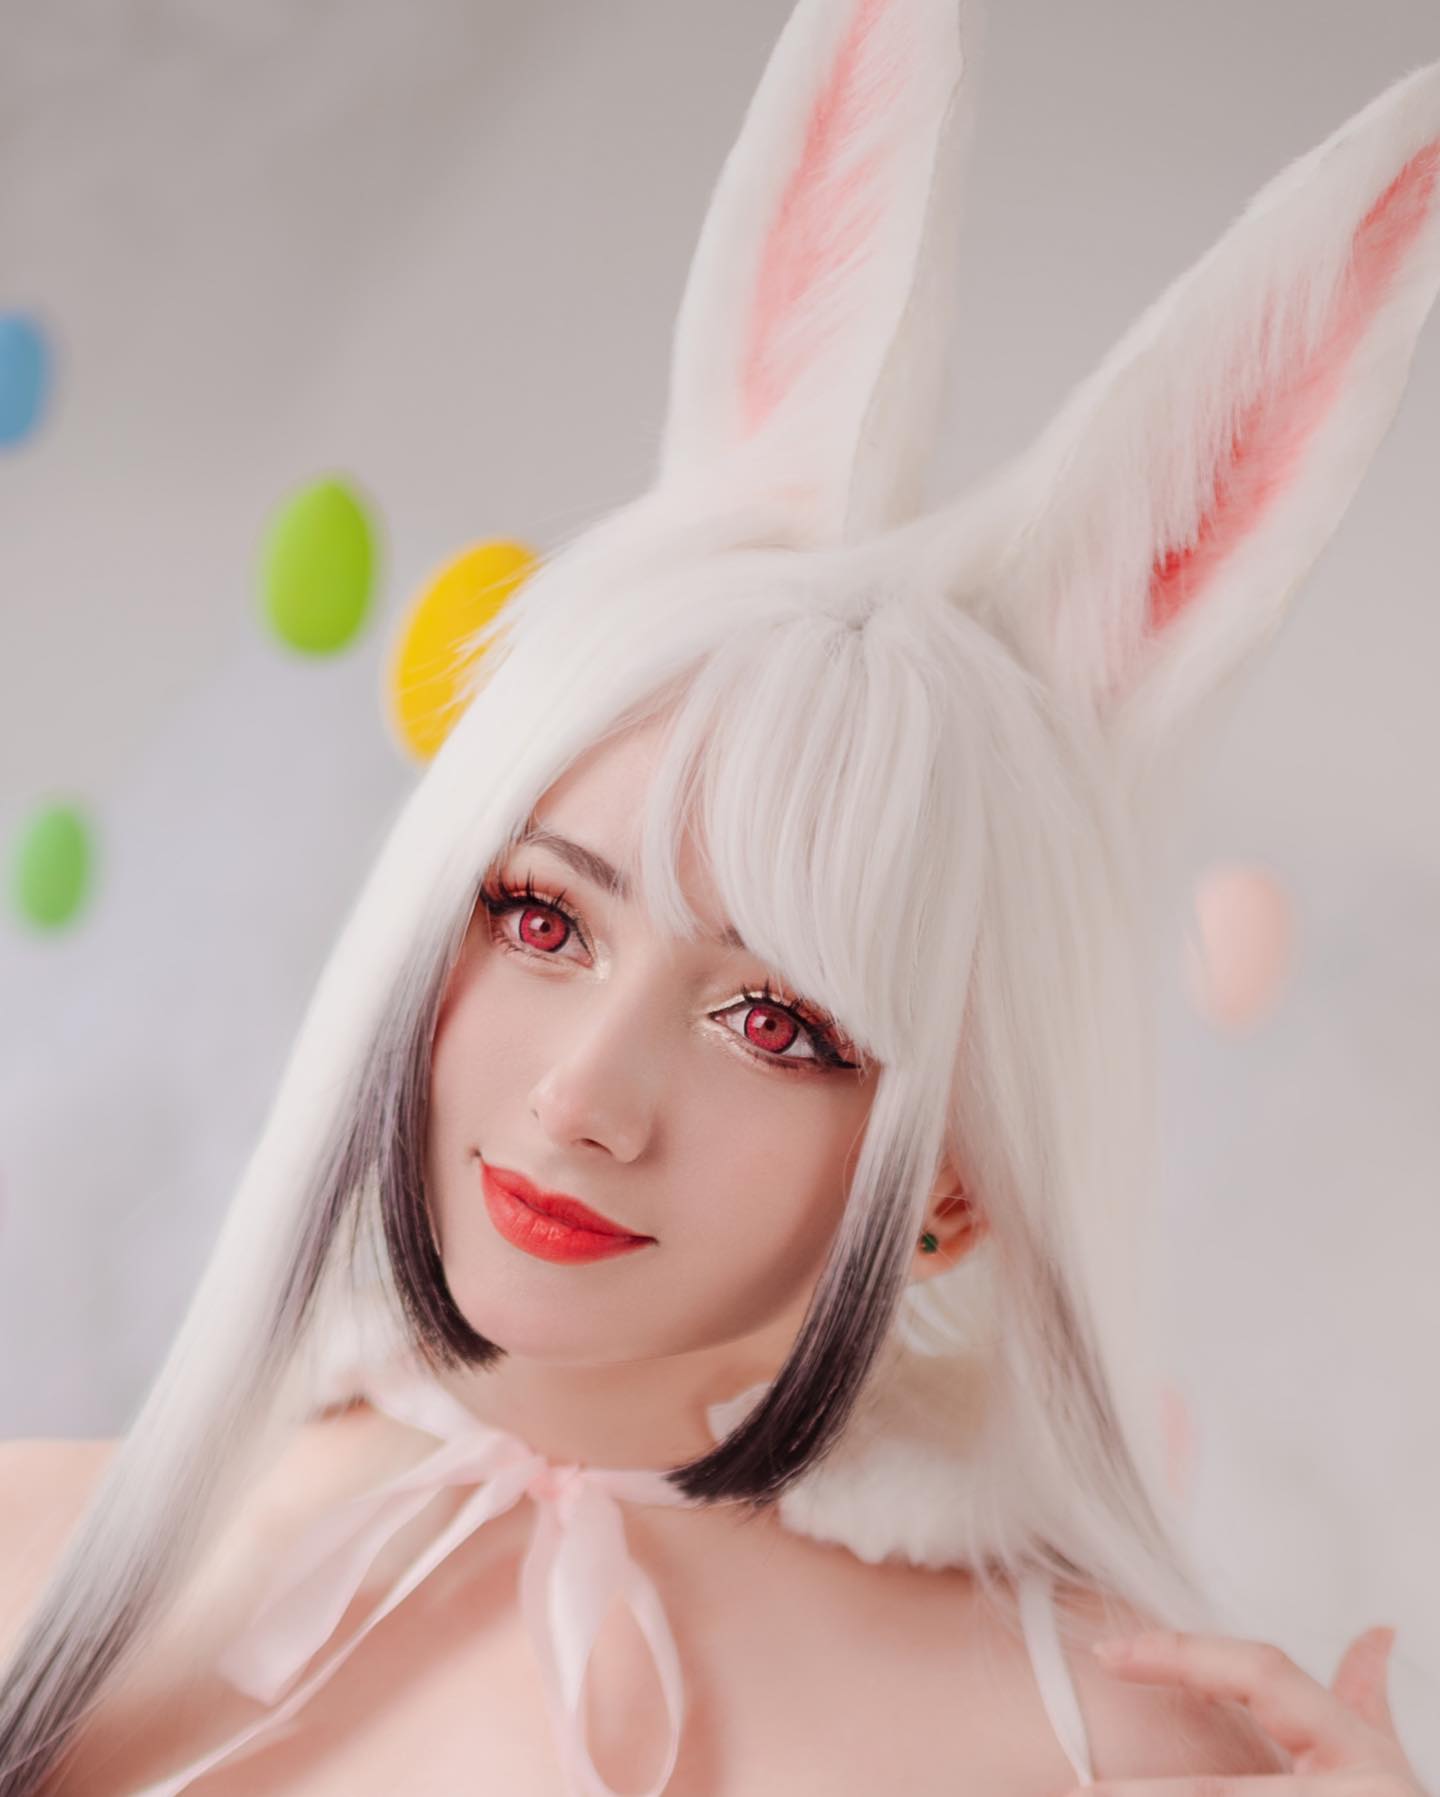 🐰🐰What did you eat for easter?🐰🐰

♡📸 @hollywhite.photo

♡ Model: @aluctoria 

#eater #bunny  #bunnygirl